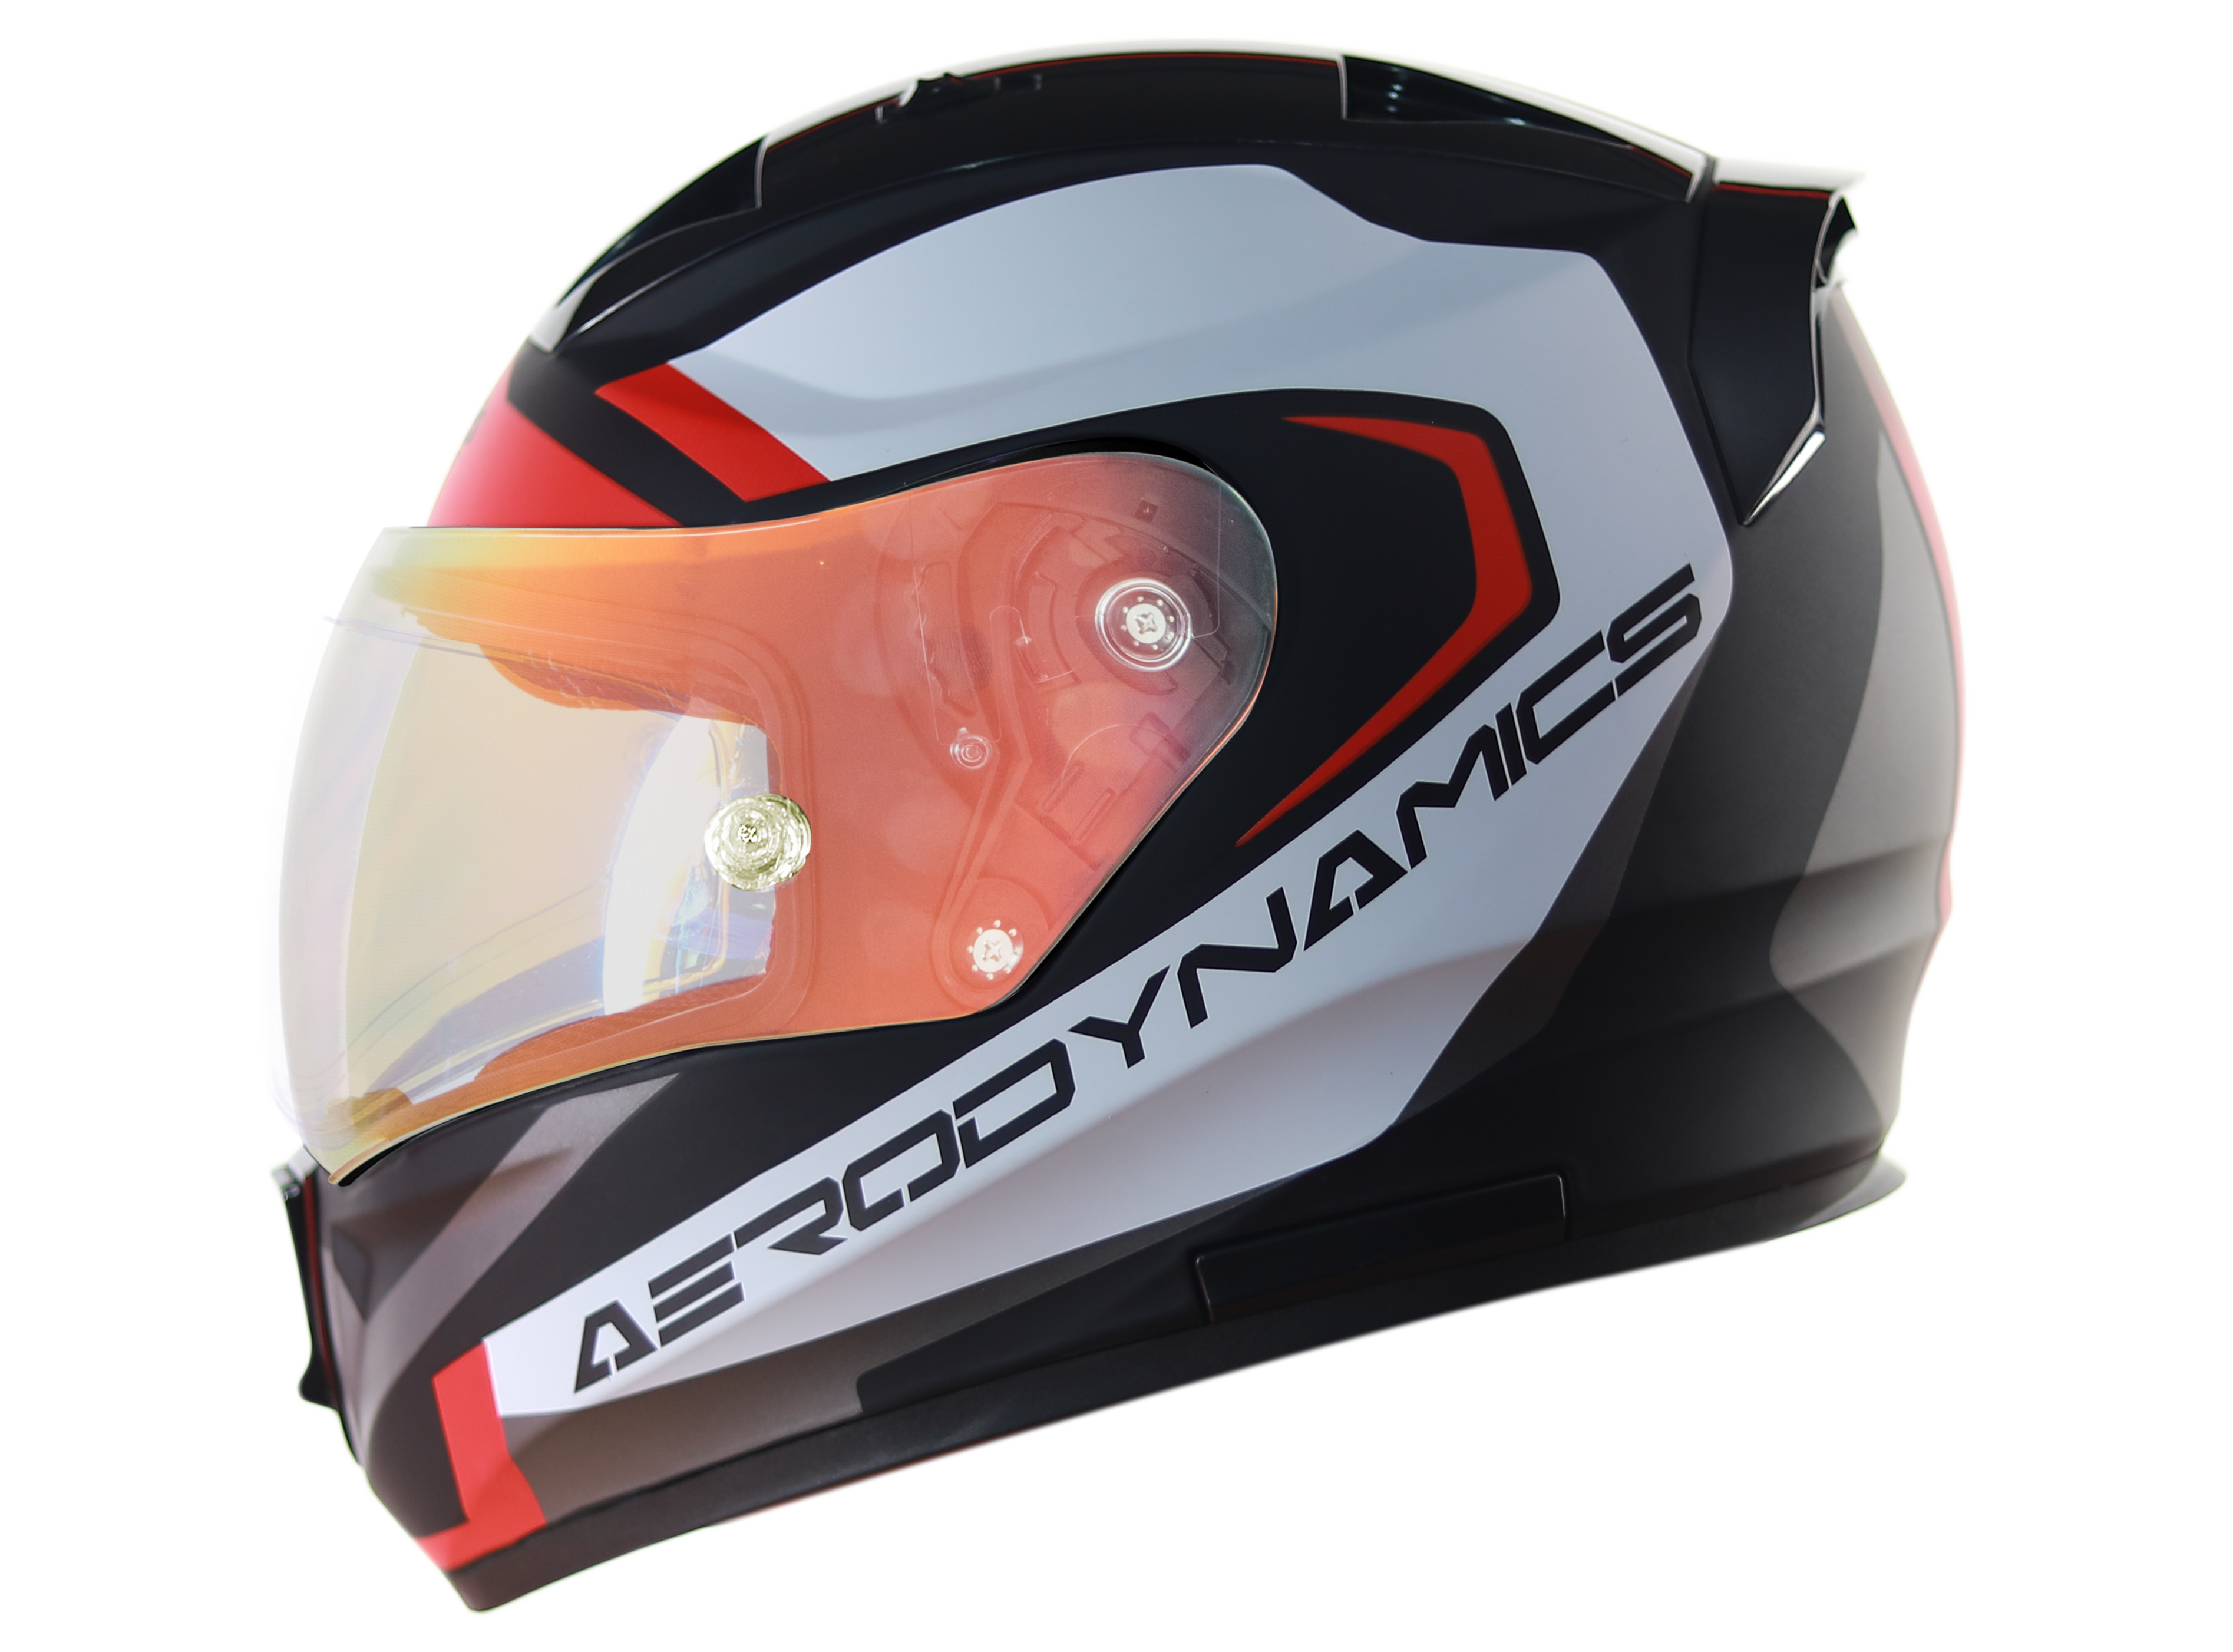 SA-1 Aerodynamics Mat Black/Red With Anti-Fog Shield Gold Night Vision Visor (Fitted With Clear Visor Extra Gold Night Vision Anti-Fog Shield Visor Free)